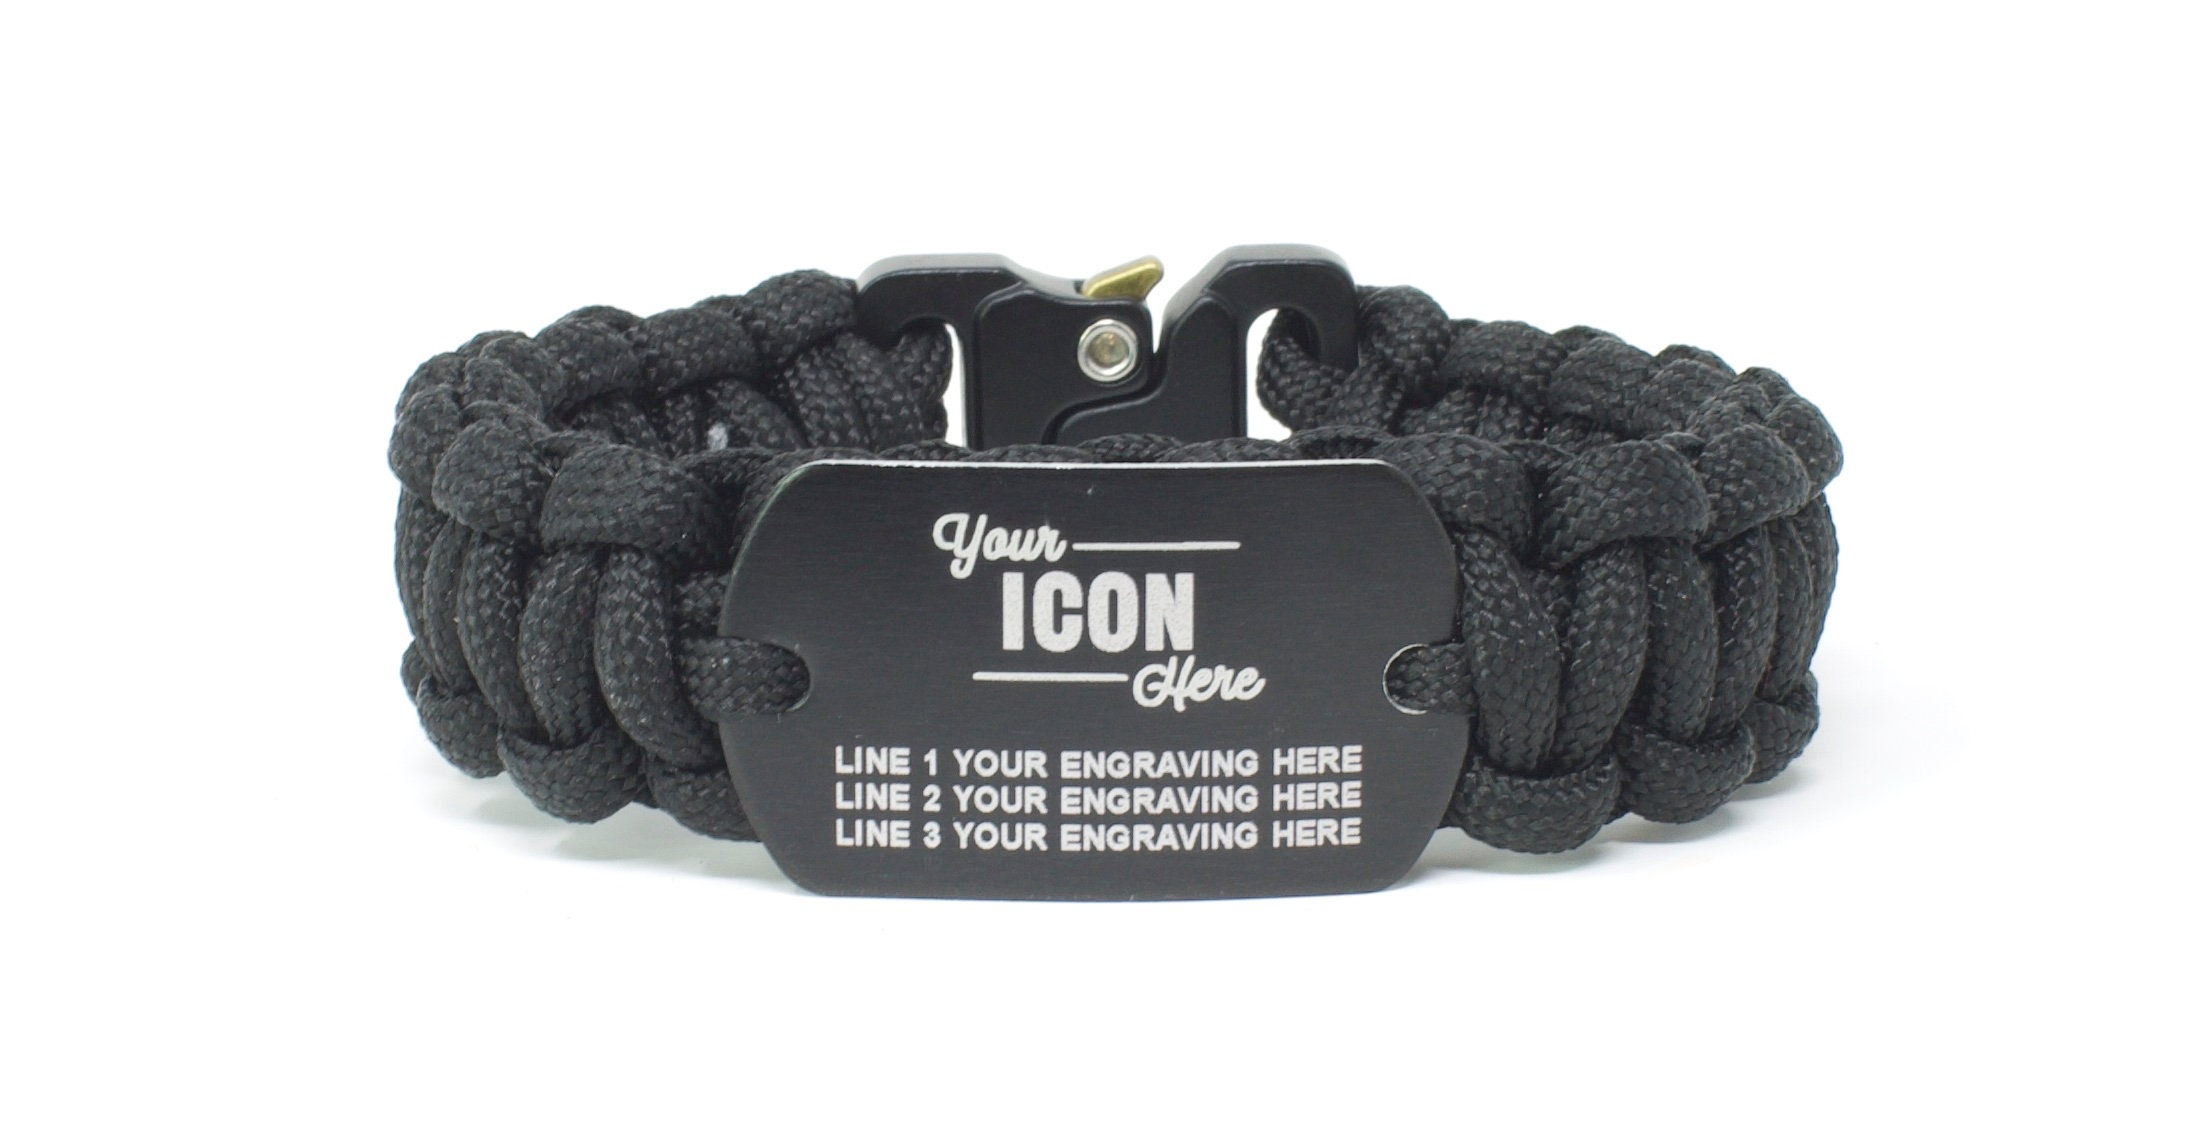 Onewly Paracord Bracelets with Bronze USA Flag - Gifts for Military  Veterans with Tactical Survival Bracelet - Pulseras Para Hombres - Bracelets  for Men Black+Green M(8.2-9.2in)